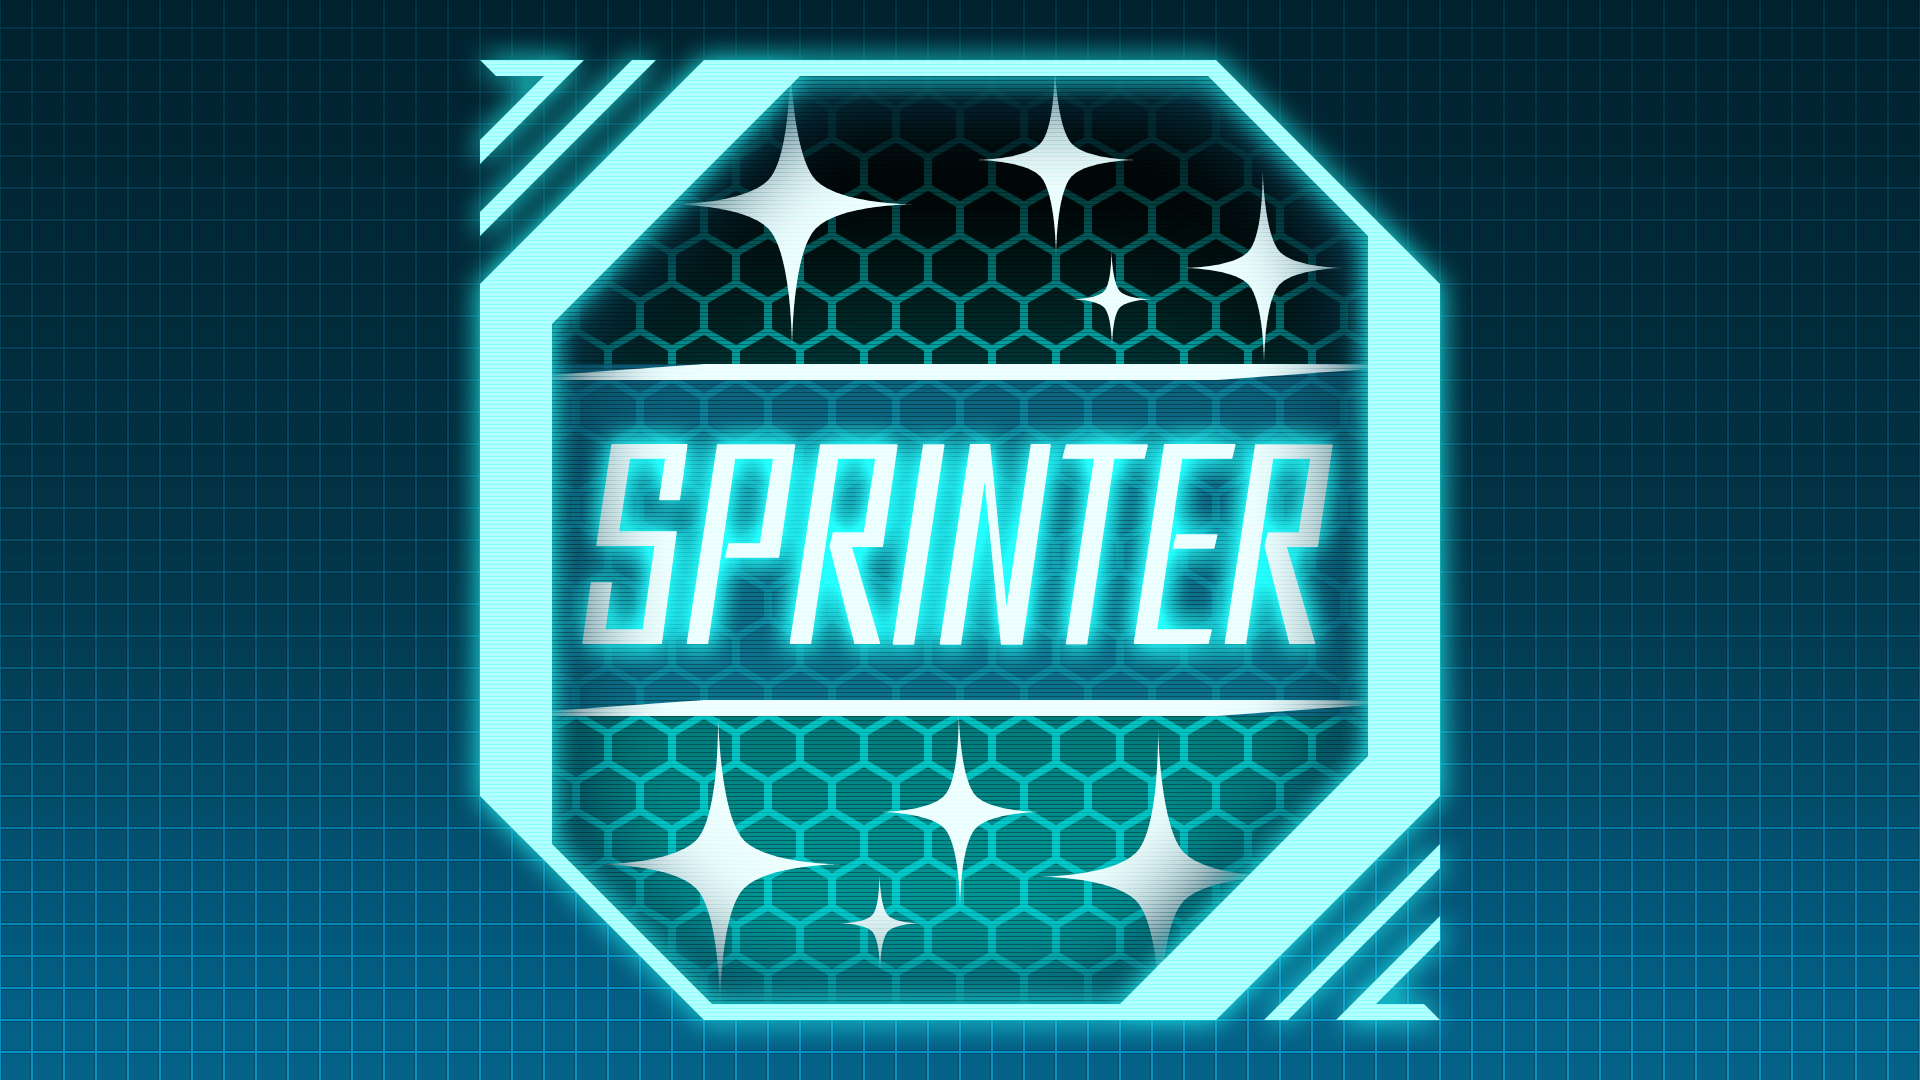 Icon for Mighty Sprinter